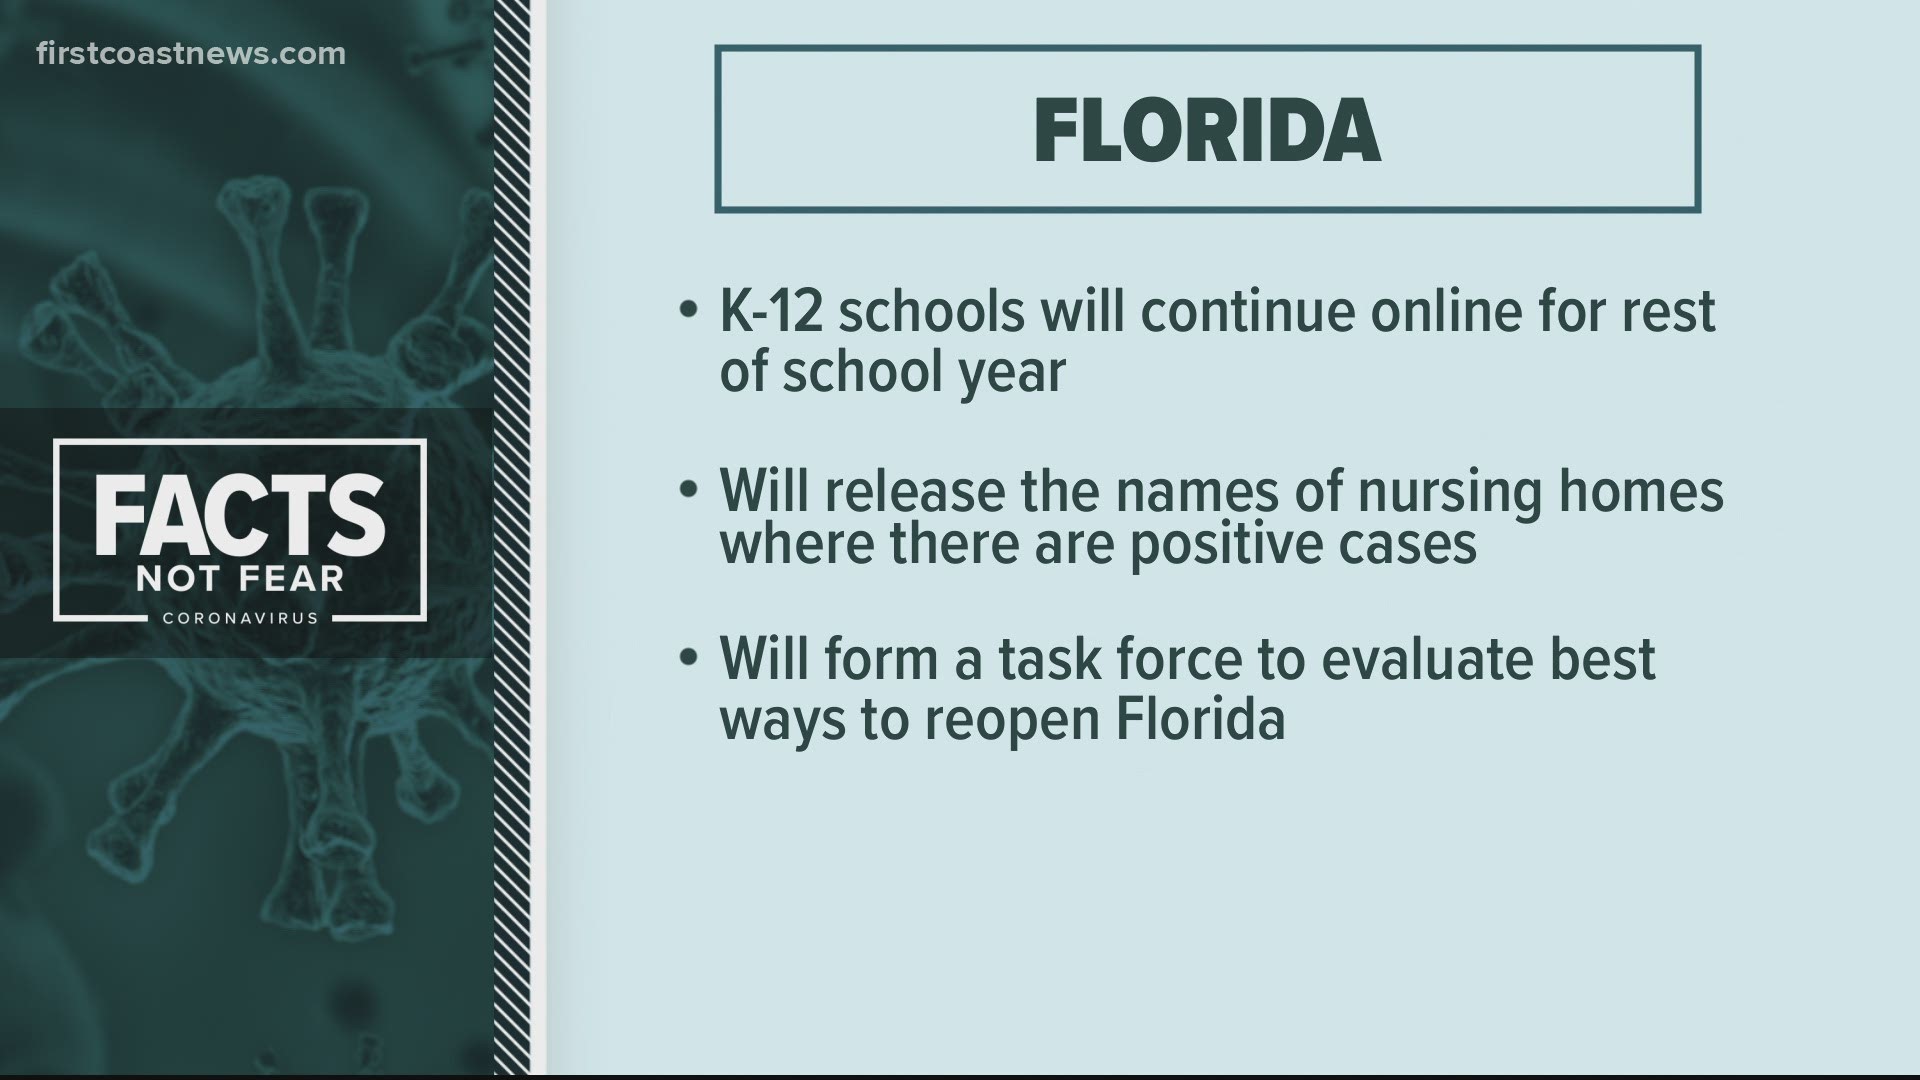 Florida Gov. Ron DeSantis announced Florida K-12 schools will continue distance learning for the duration of the school year.